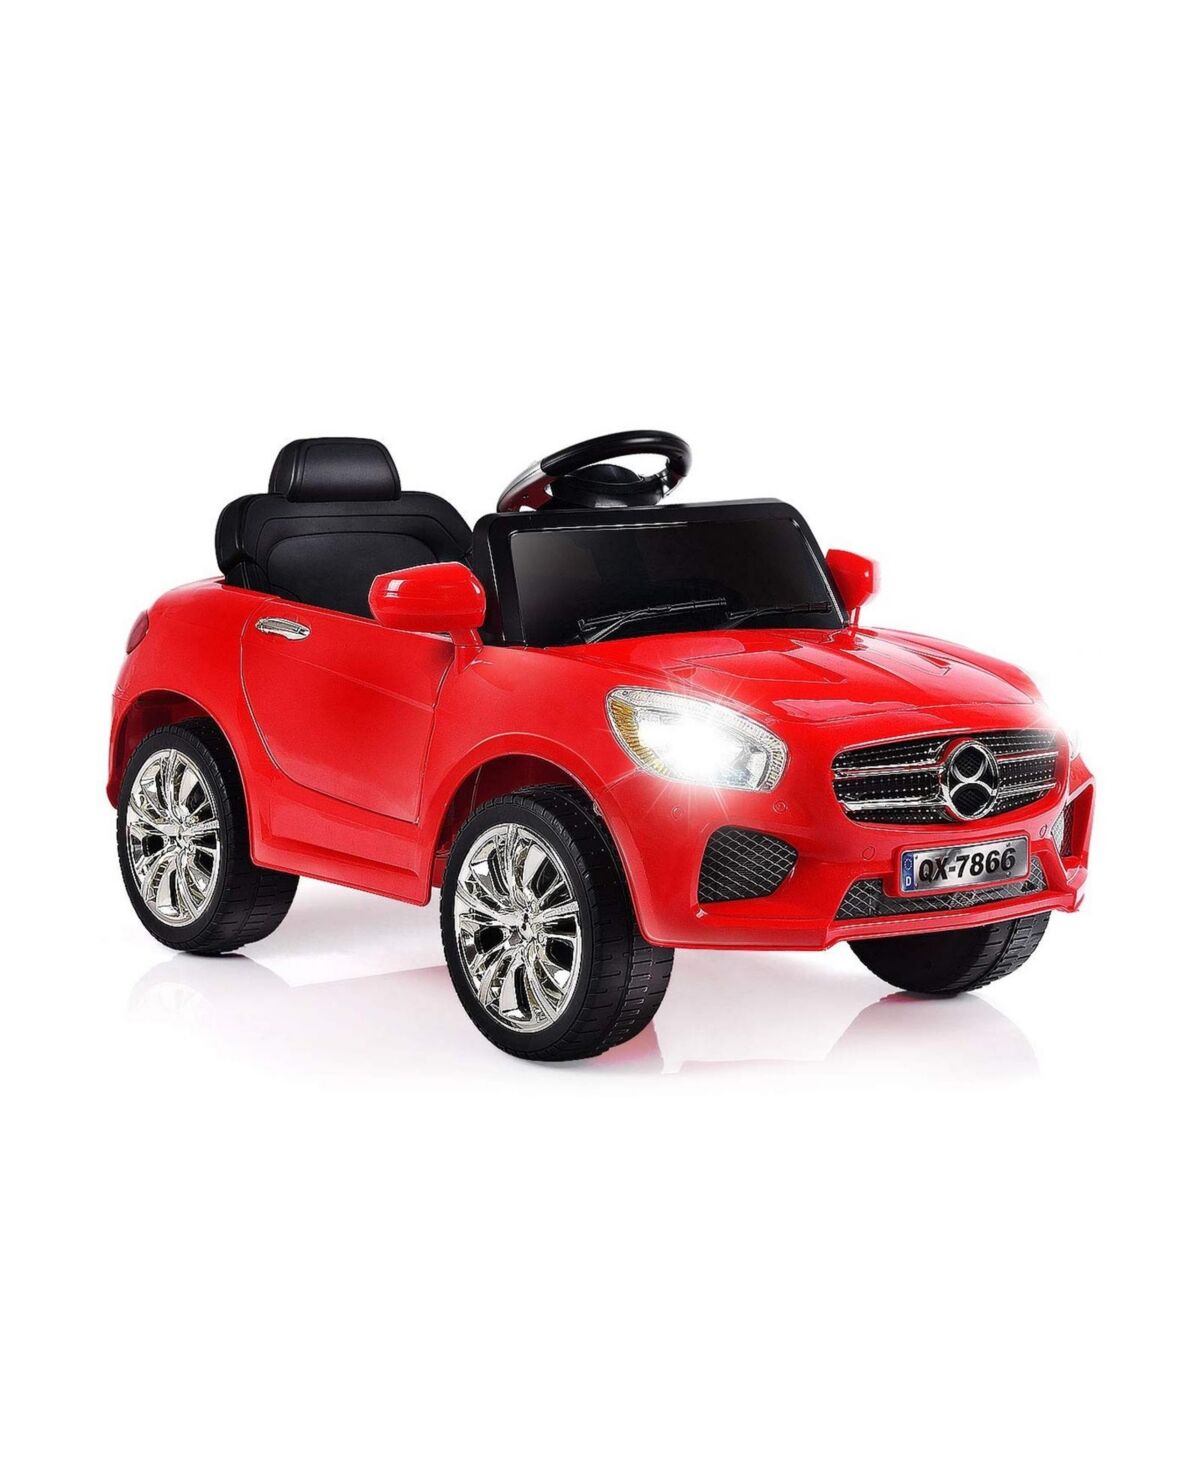 Sugift 6V Kids Remote Control Battery Powered Led Lights Riding Car-Red - Red